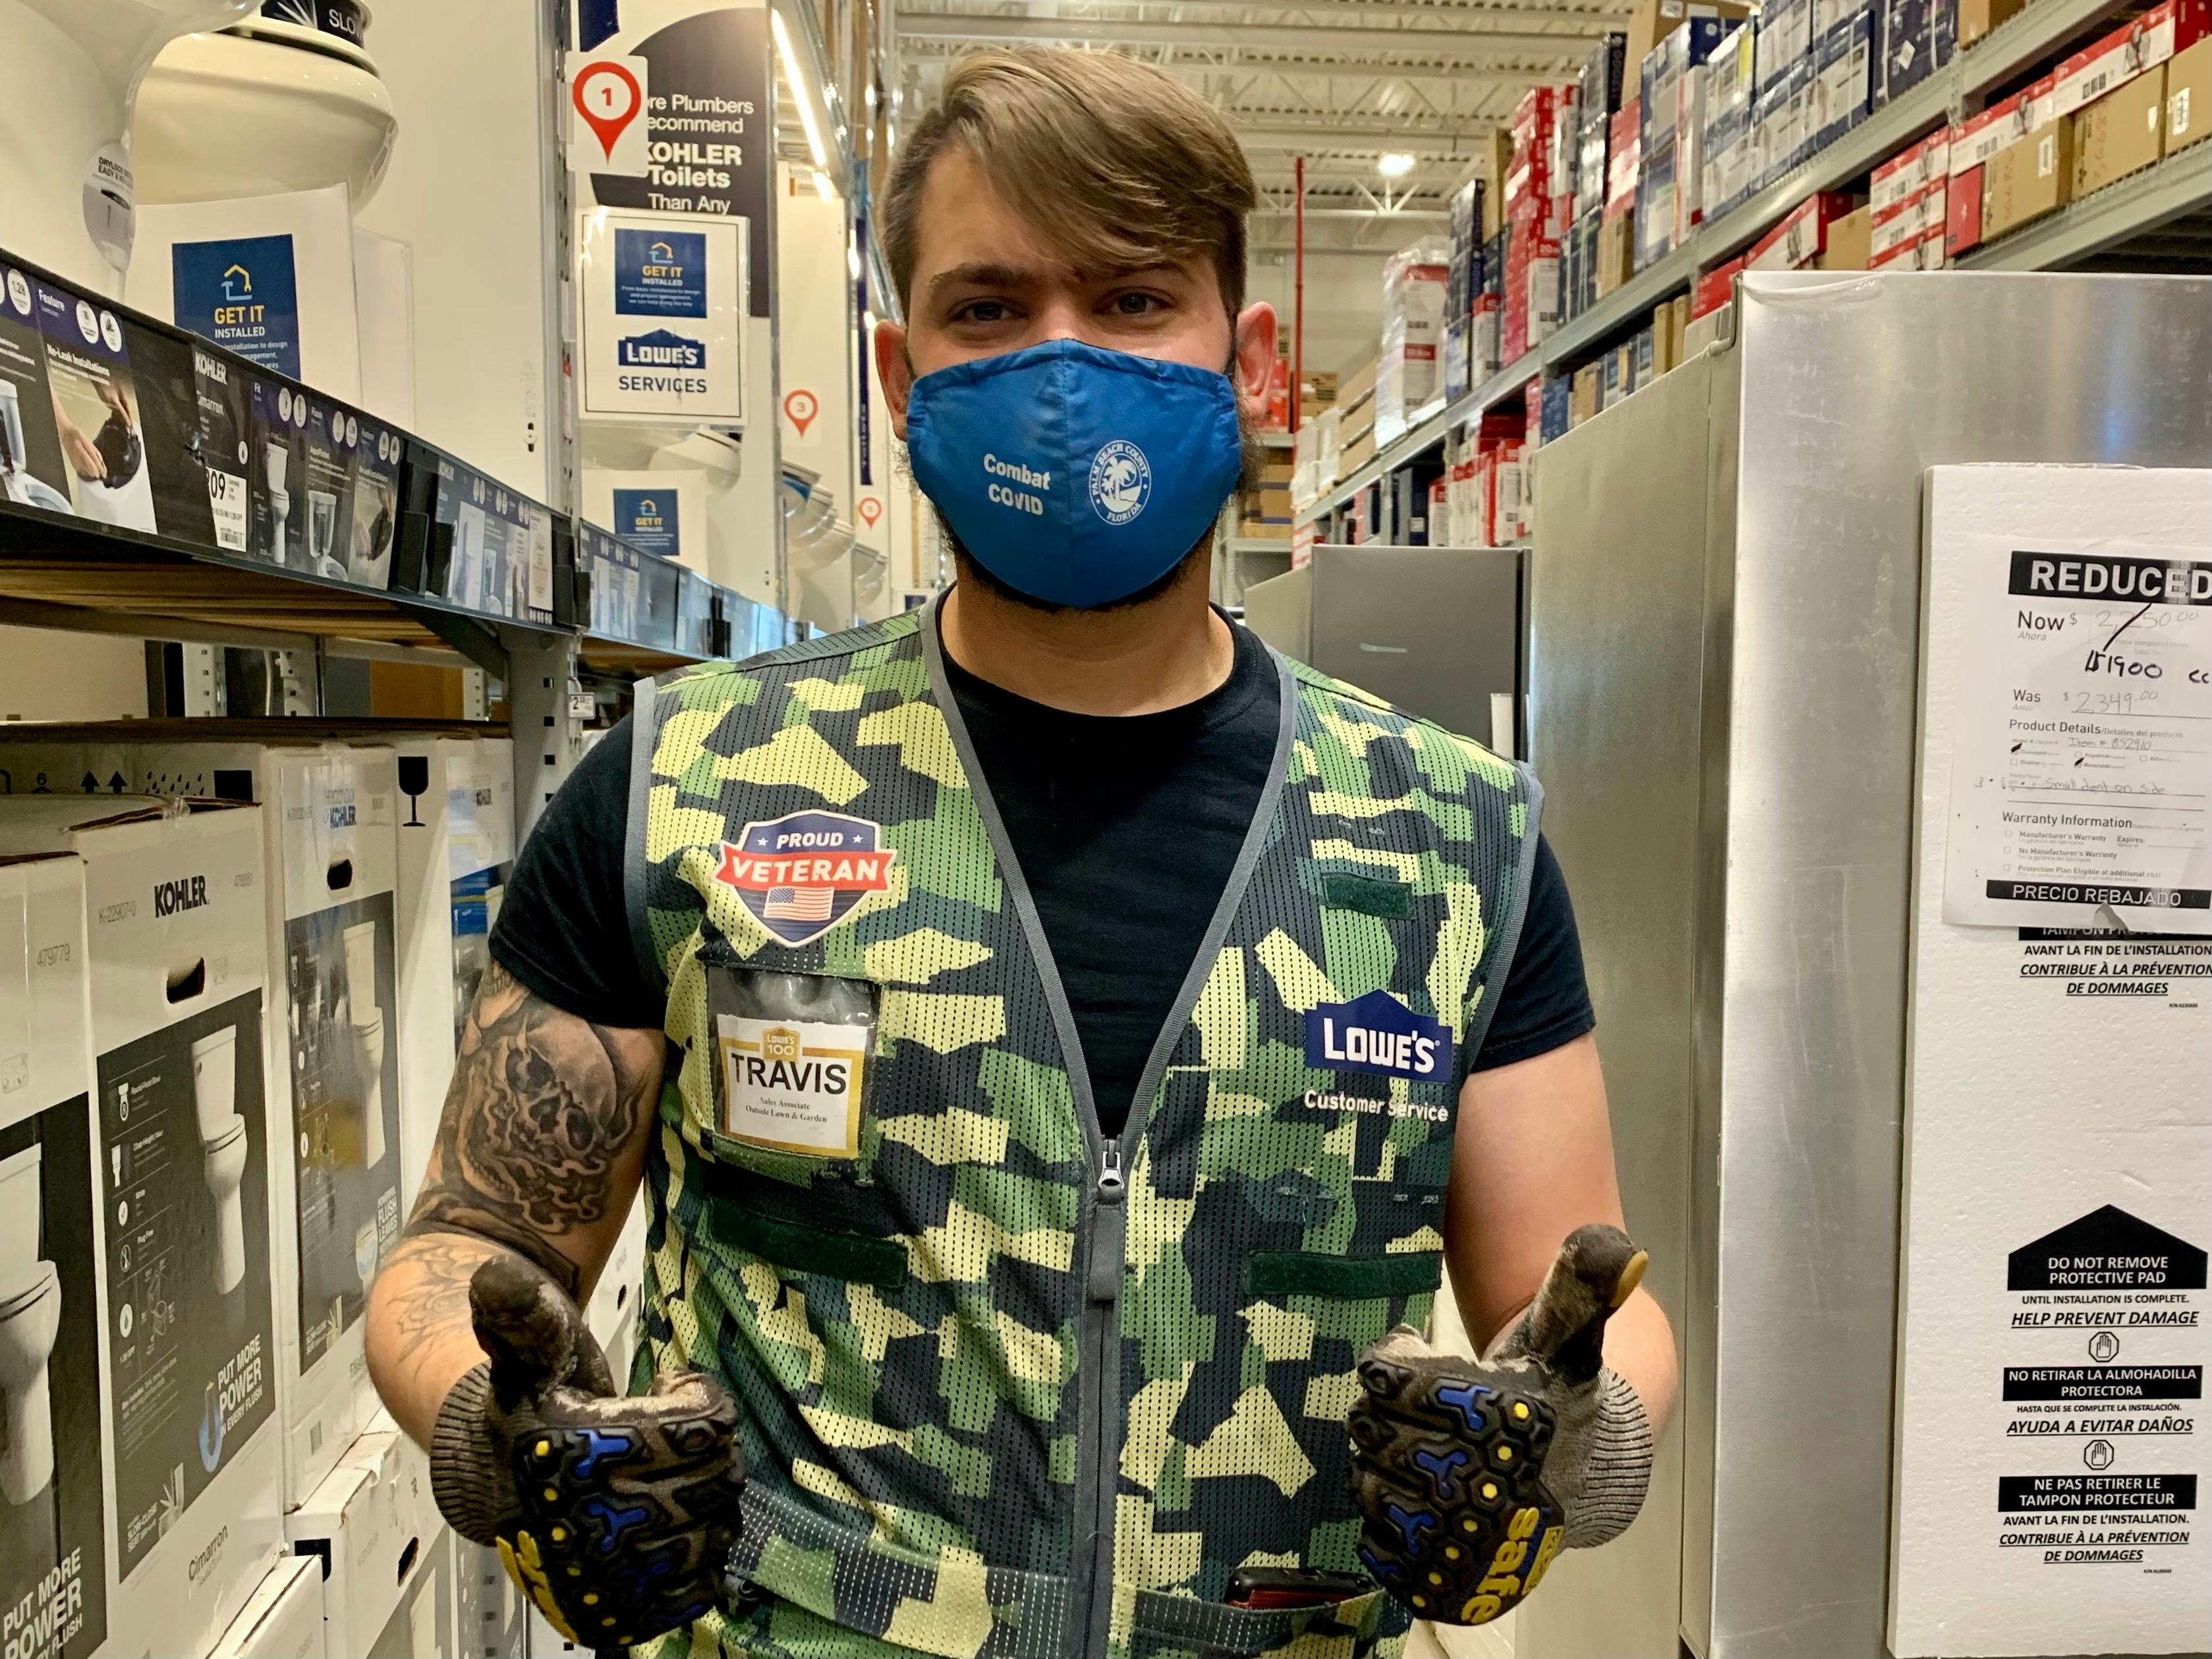 veteran lowes employee giving a thumbs up